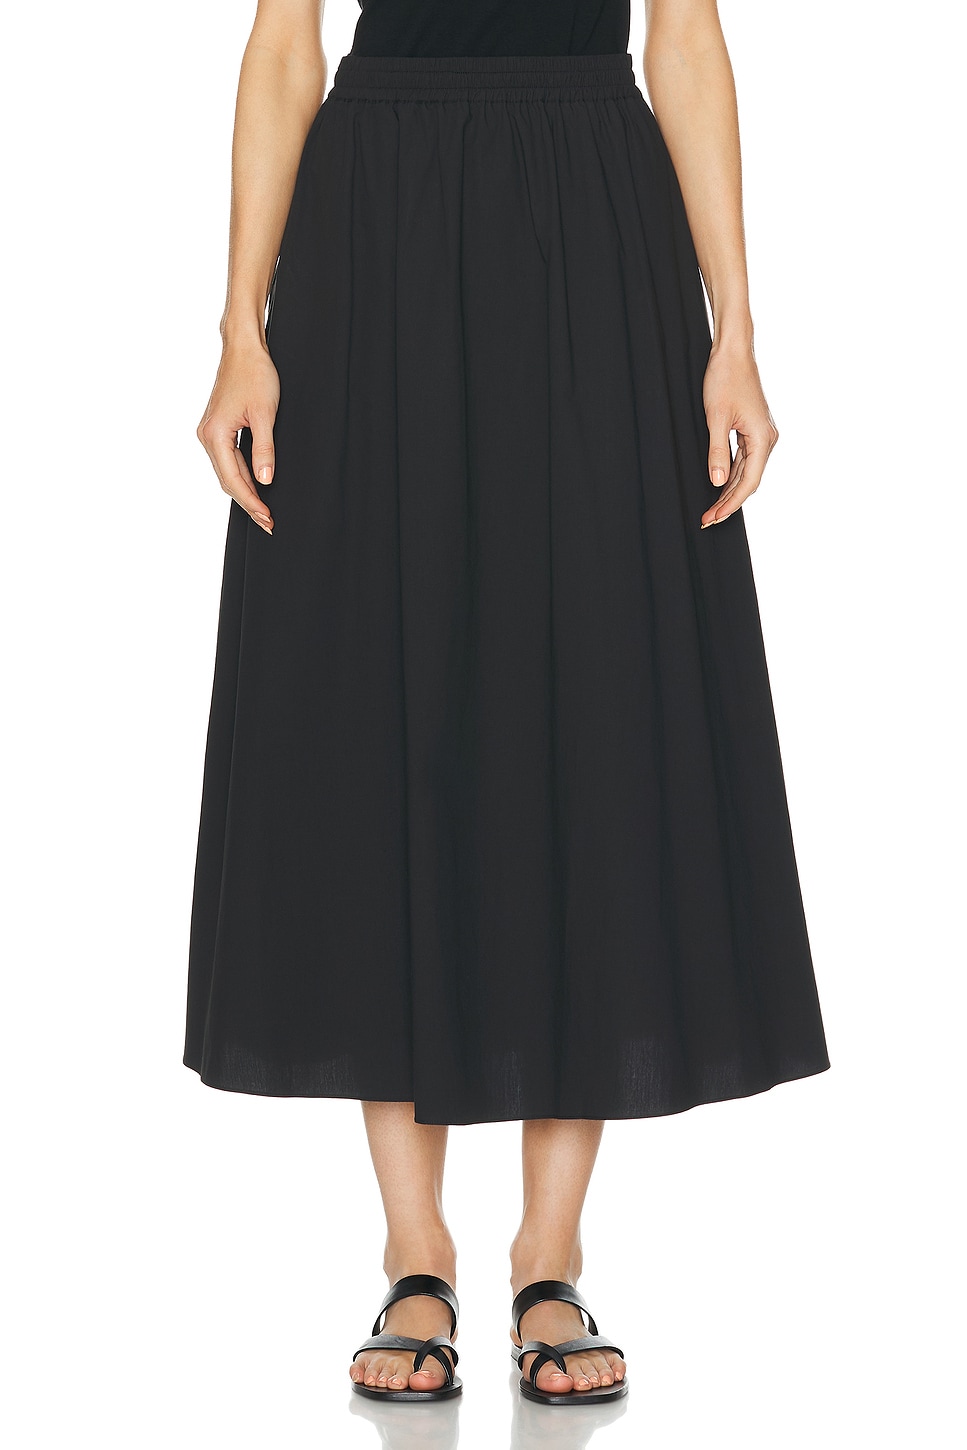 Image 1 of Matteau Relaxed Everyday Skirt in Black